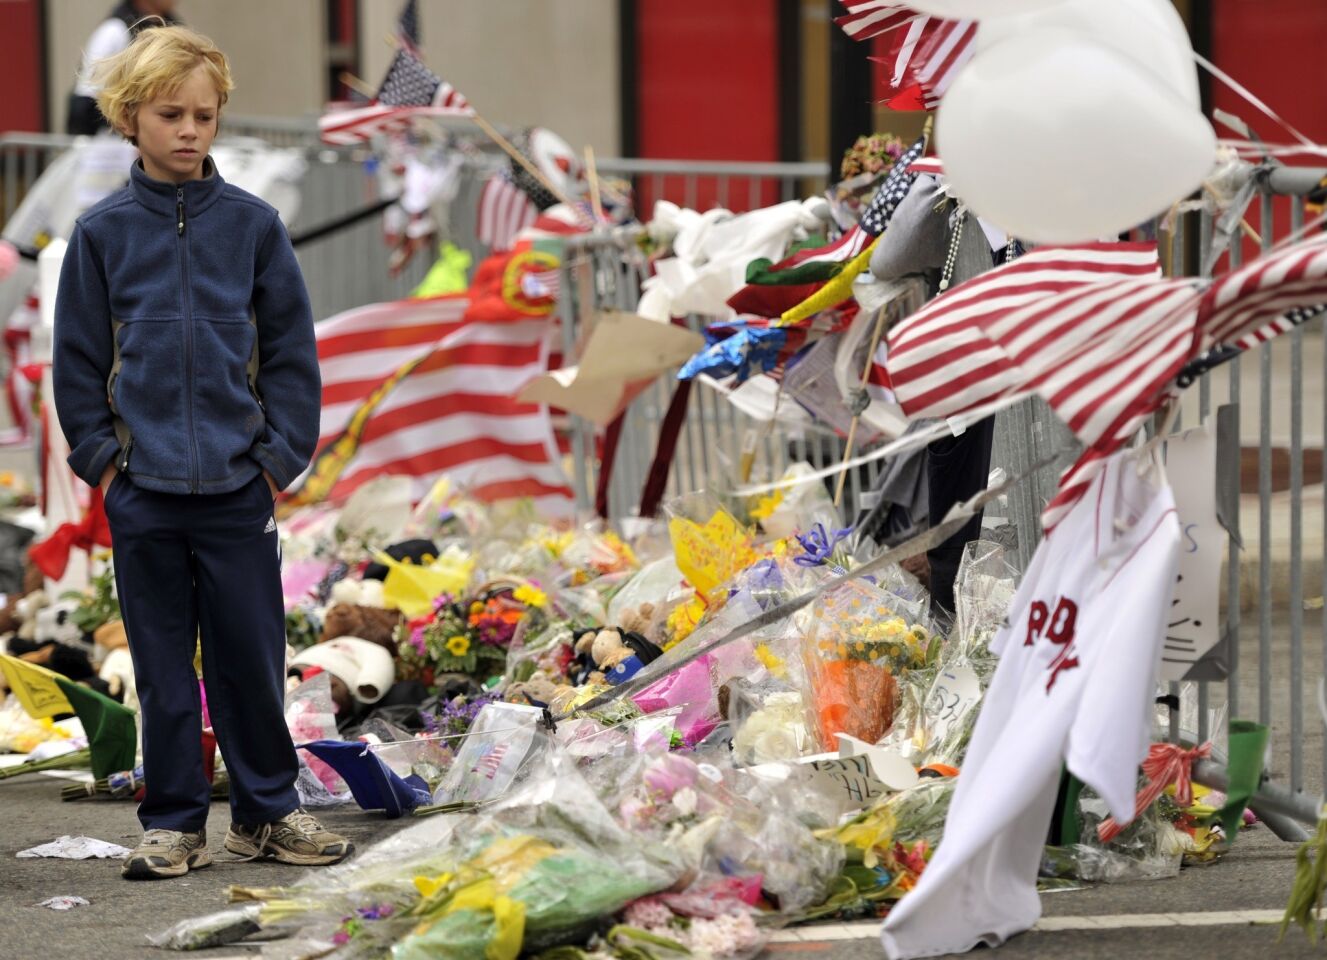 A boy contemplates a street memorial on Boylston Street, the scene of two explosions that killed three people Monday near the Boston Marathon finish line, as Bostonians began returning to normal life on the morning after the capture of the second of two suspects wanted in the bombings.